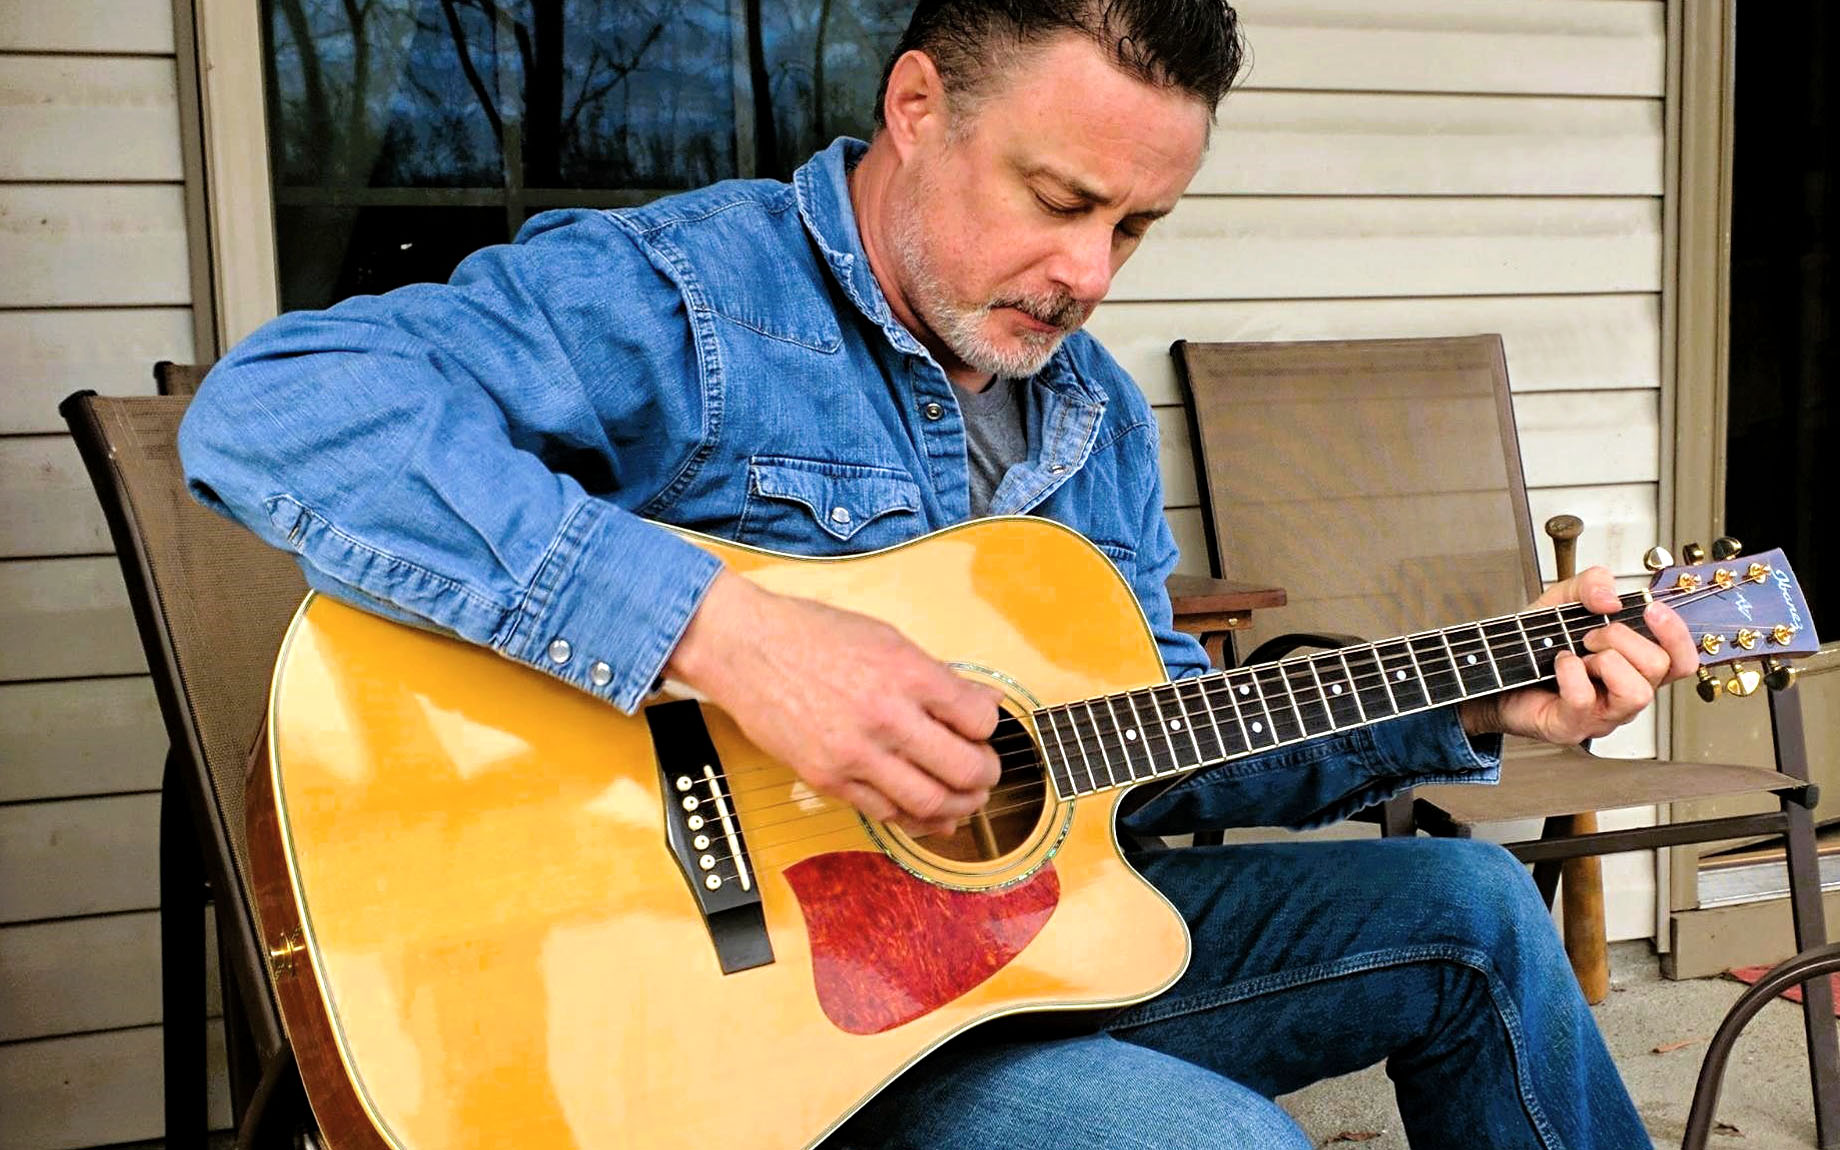 Billy Ray McClelland plays acoustic guitar in a chair in front of a house.